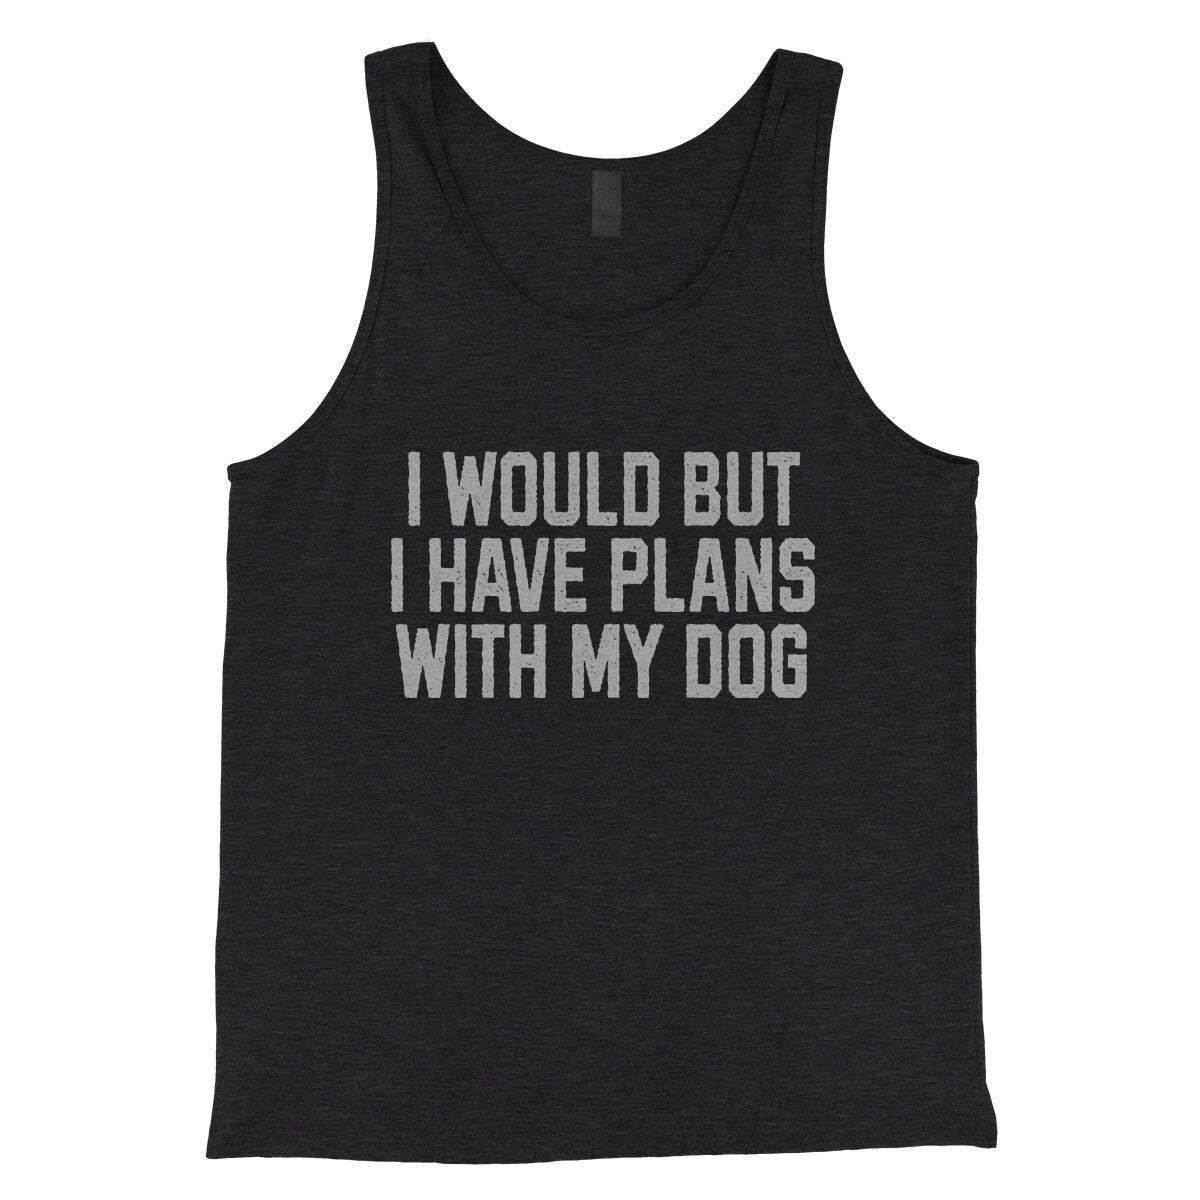 I Would but I Have Plans with My Dog in Charcoal Black TriBlend Color